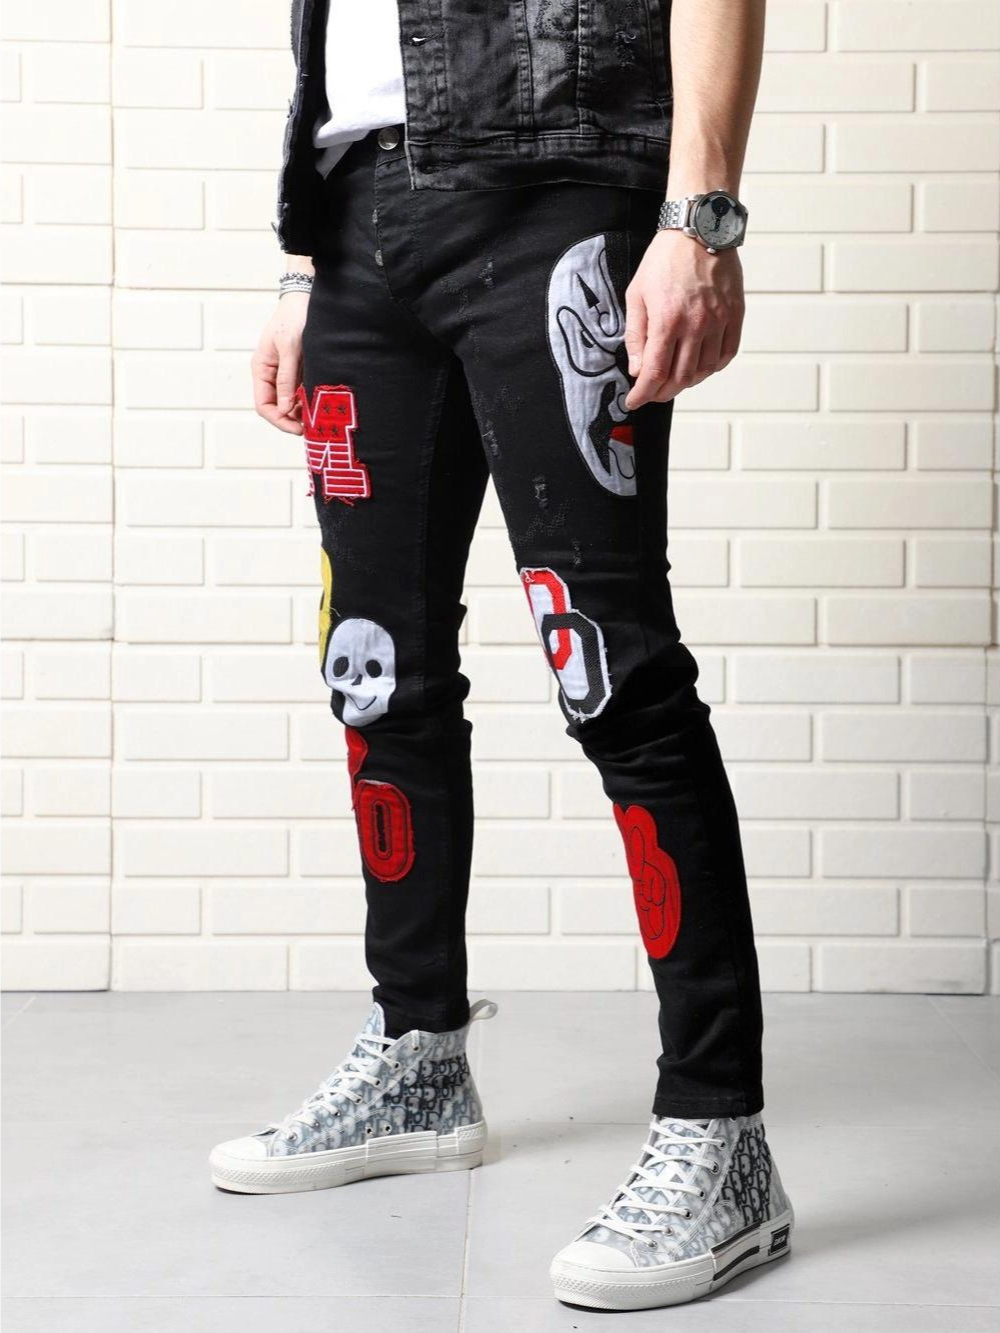 A man wearing a pair of black jeans with a CLOWN CAR patch on them.